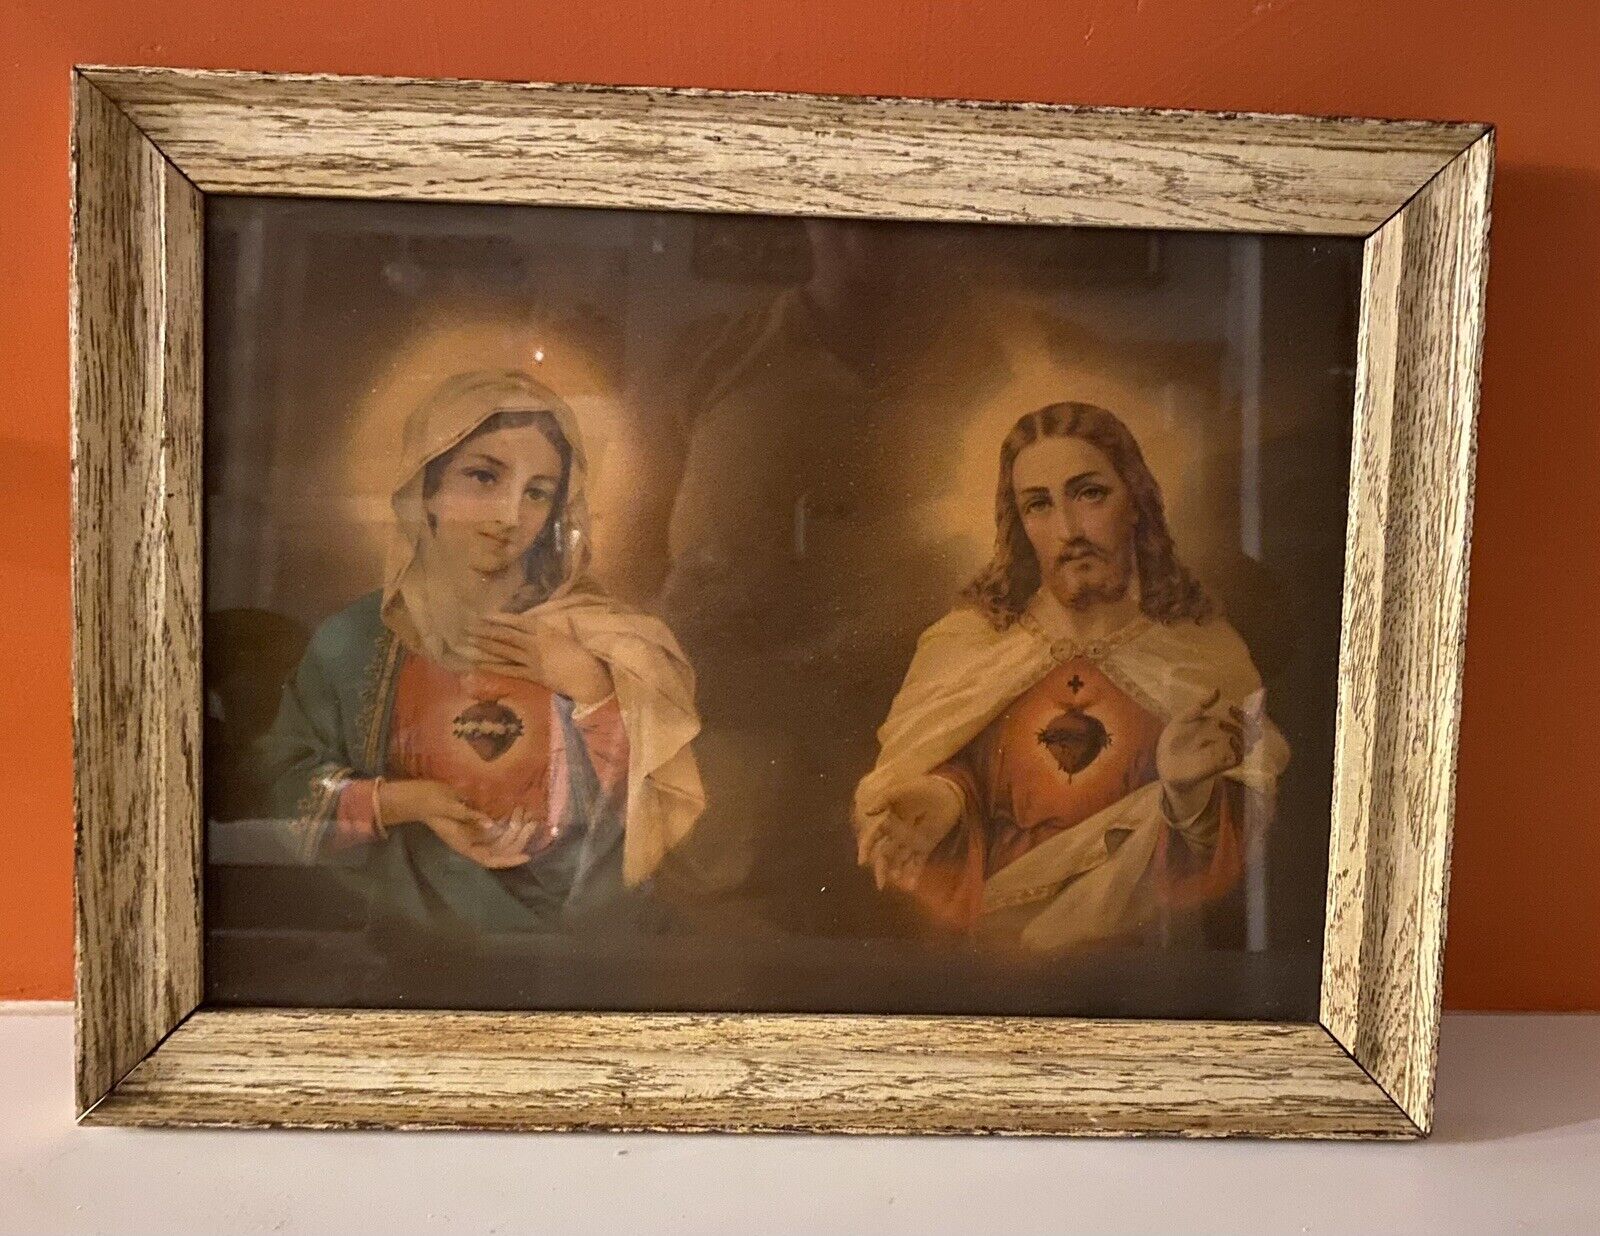 OLD Immaculate Heart of MARY JESUS Sacred Heart Print. Originals from 1880’s